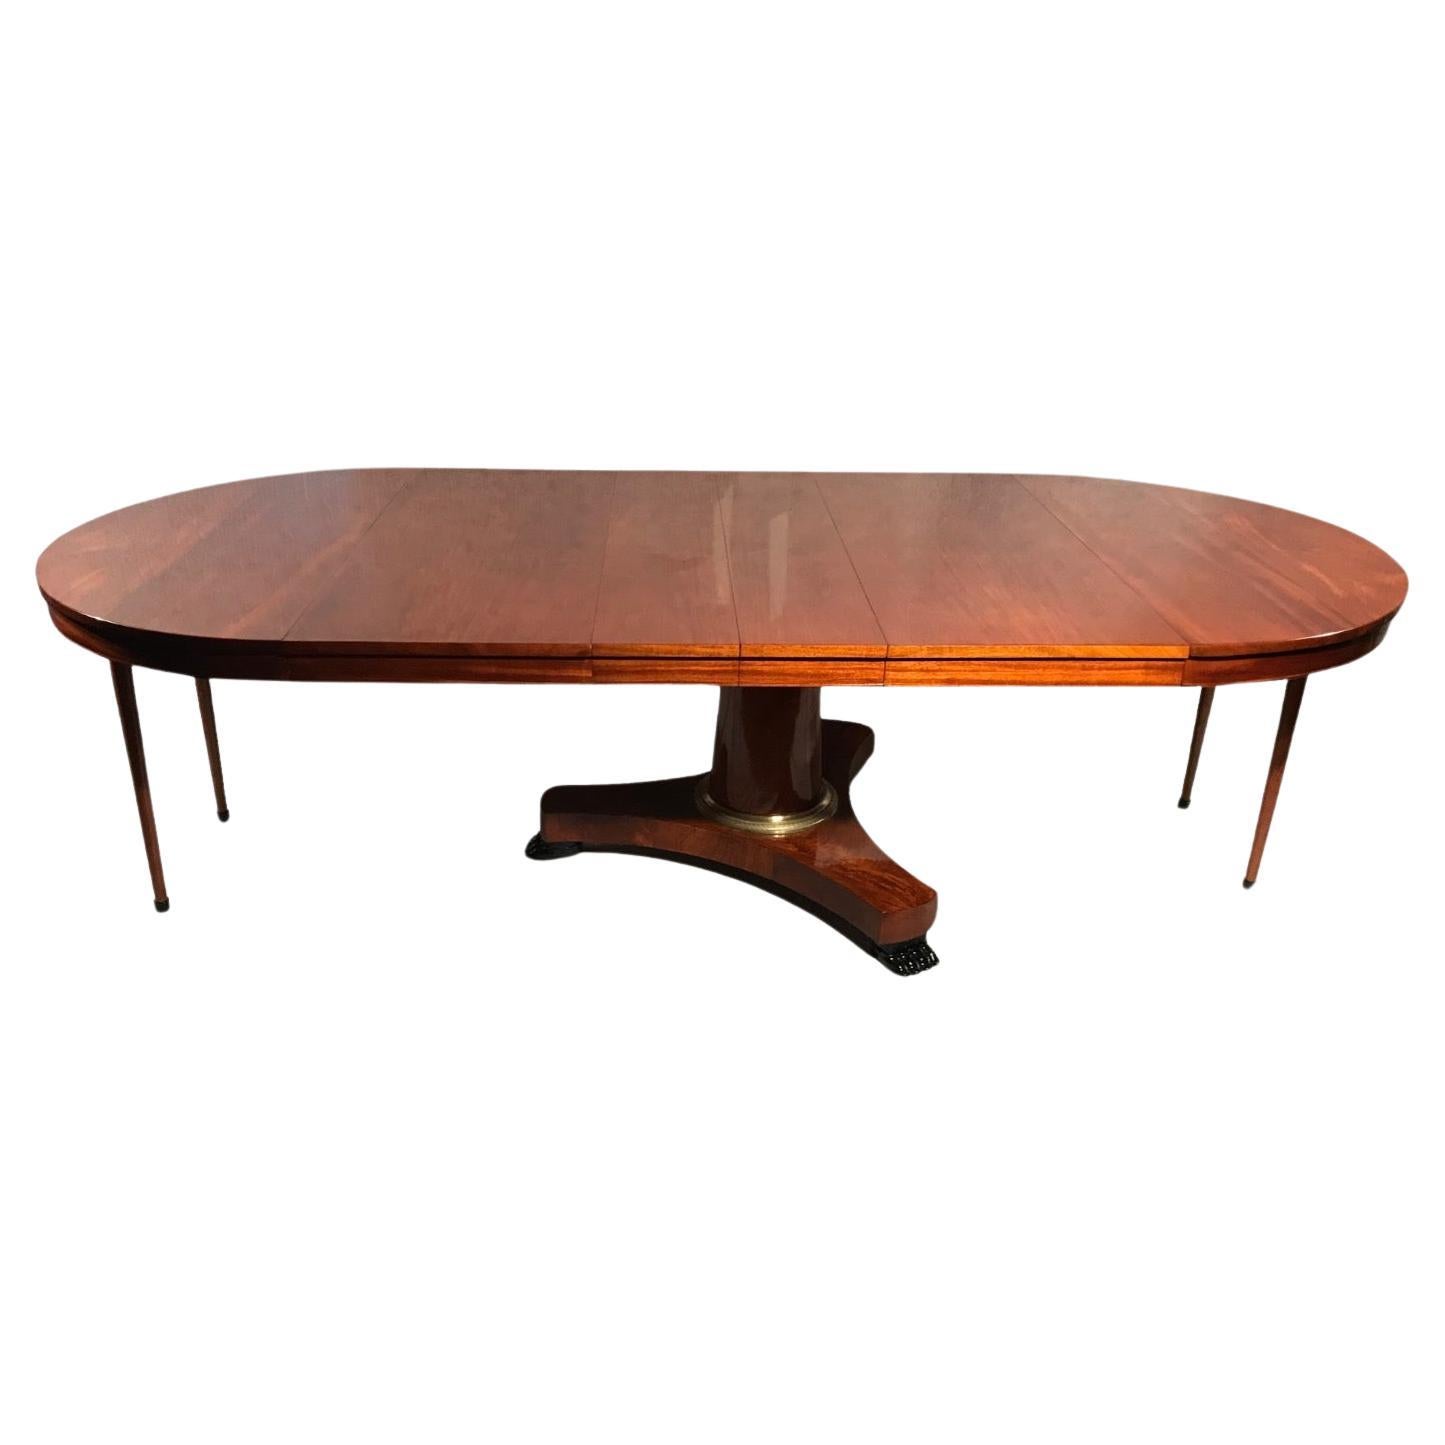 This exquisite Biedermeier/French Restauration Table, dating back to 1830 and originating from France, is a true gem for those with a taste for classic elegance. The table features a round design, with a central column gracefully resting on a